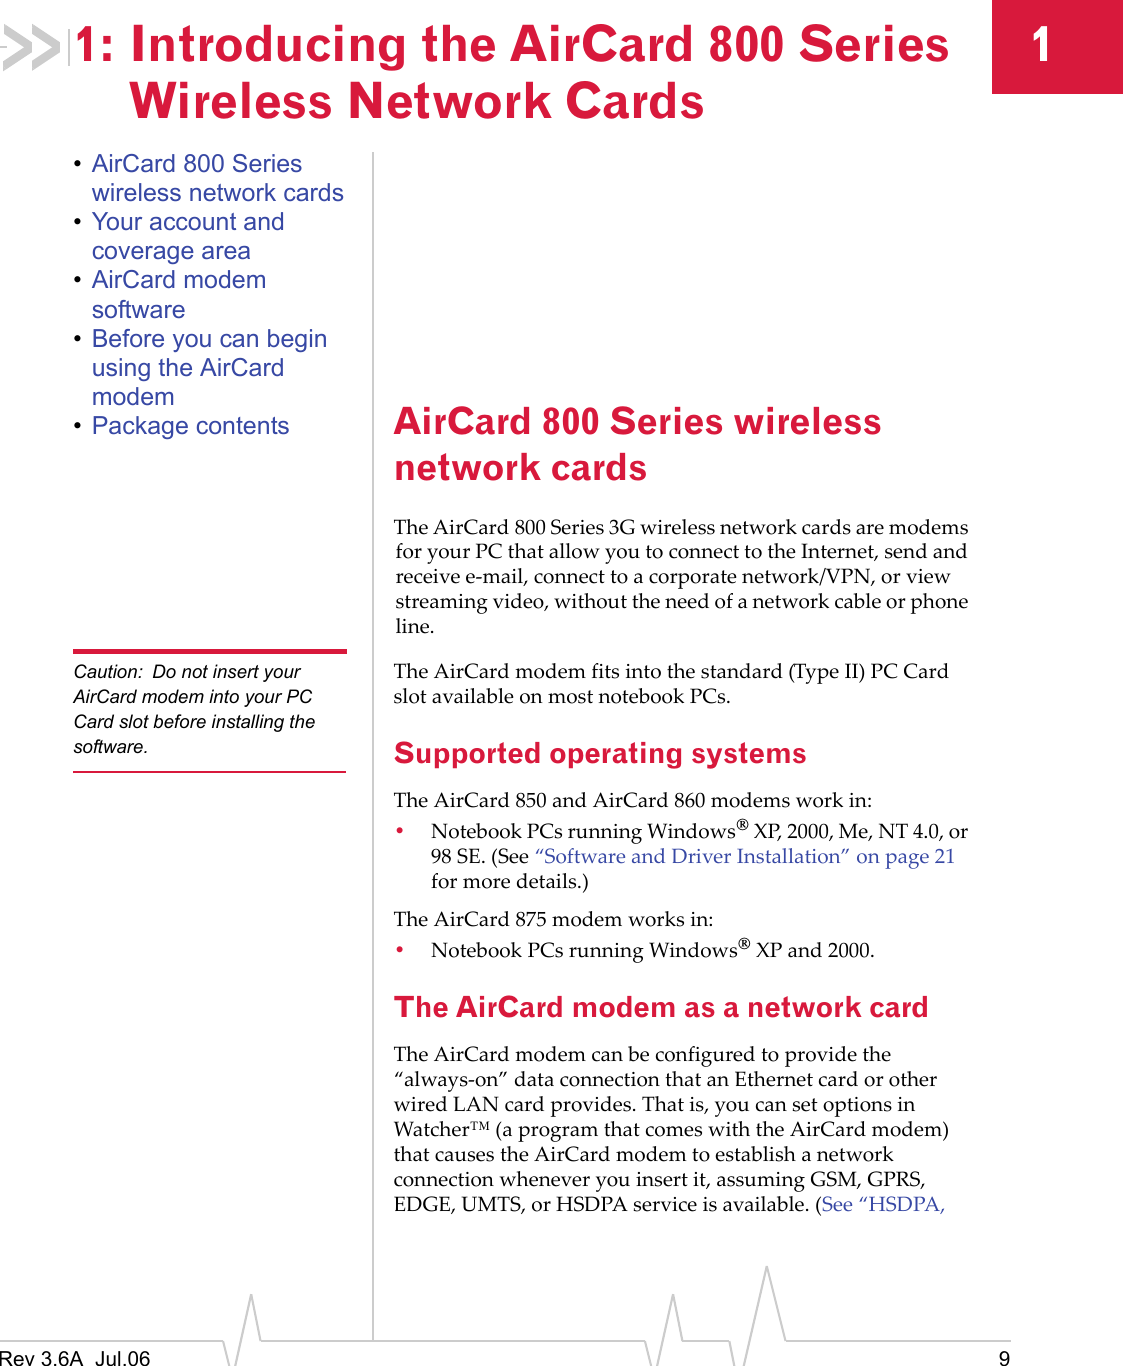 Rev 3.6A  Jul.06 911: Introducing the AirCard 800 Series Wireless Network Cards•AirCard 800 Series wireless network cards•Your account and coverage area•AirCard modem software•Before you can begin using the AirCard modem•Package contents AirCard 800 Series wireless network cardsThe AirCard 800 Series 3G wireless network cards are modems for your PC that allow you to connect to the Internet, send and receive e-mail, connect to a corporate network/VPN, or view streaming video, without the need of a network cable or phone line.Caution: Do not insert your AirCard modem into your PC Card slot before installing the software.The AirCard modem fits into the standard (Type II) PC Card slot available on most notebook PCs. Supported operating systemsThe AirCard 850 and AirCard 860 modems work in:•Notebook PCs running Windows® XP, 2000, Me, NT 4.0, or 98 SE. (See “Software and Driver Installation” on page 21 for more details.)The AirCard 875 modem works in:•Notebook PCs running Windows® XP and 2000. The AirCard modem as a network cardThe AirCard modem can be configured to provide the “always-on” data connection that an Ethernet card or other wired LAN card provides. That is, you can set options in Watcher™ (a program that comes with the AirCard modem) that causes the AirCard modem to establish a network connection whenever you insert it, assuming GSM, GPRS, EDGE, UMTS, or HSDPA service is available. (See “HSDPA, 